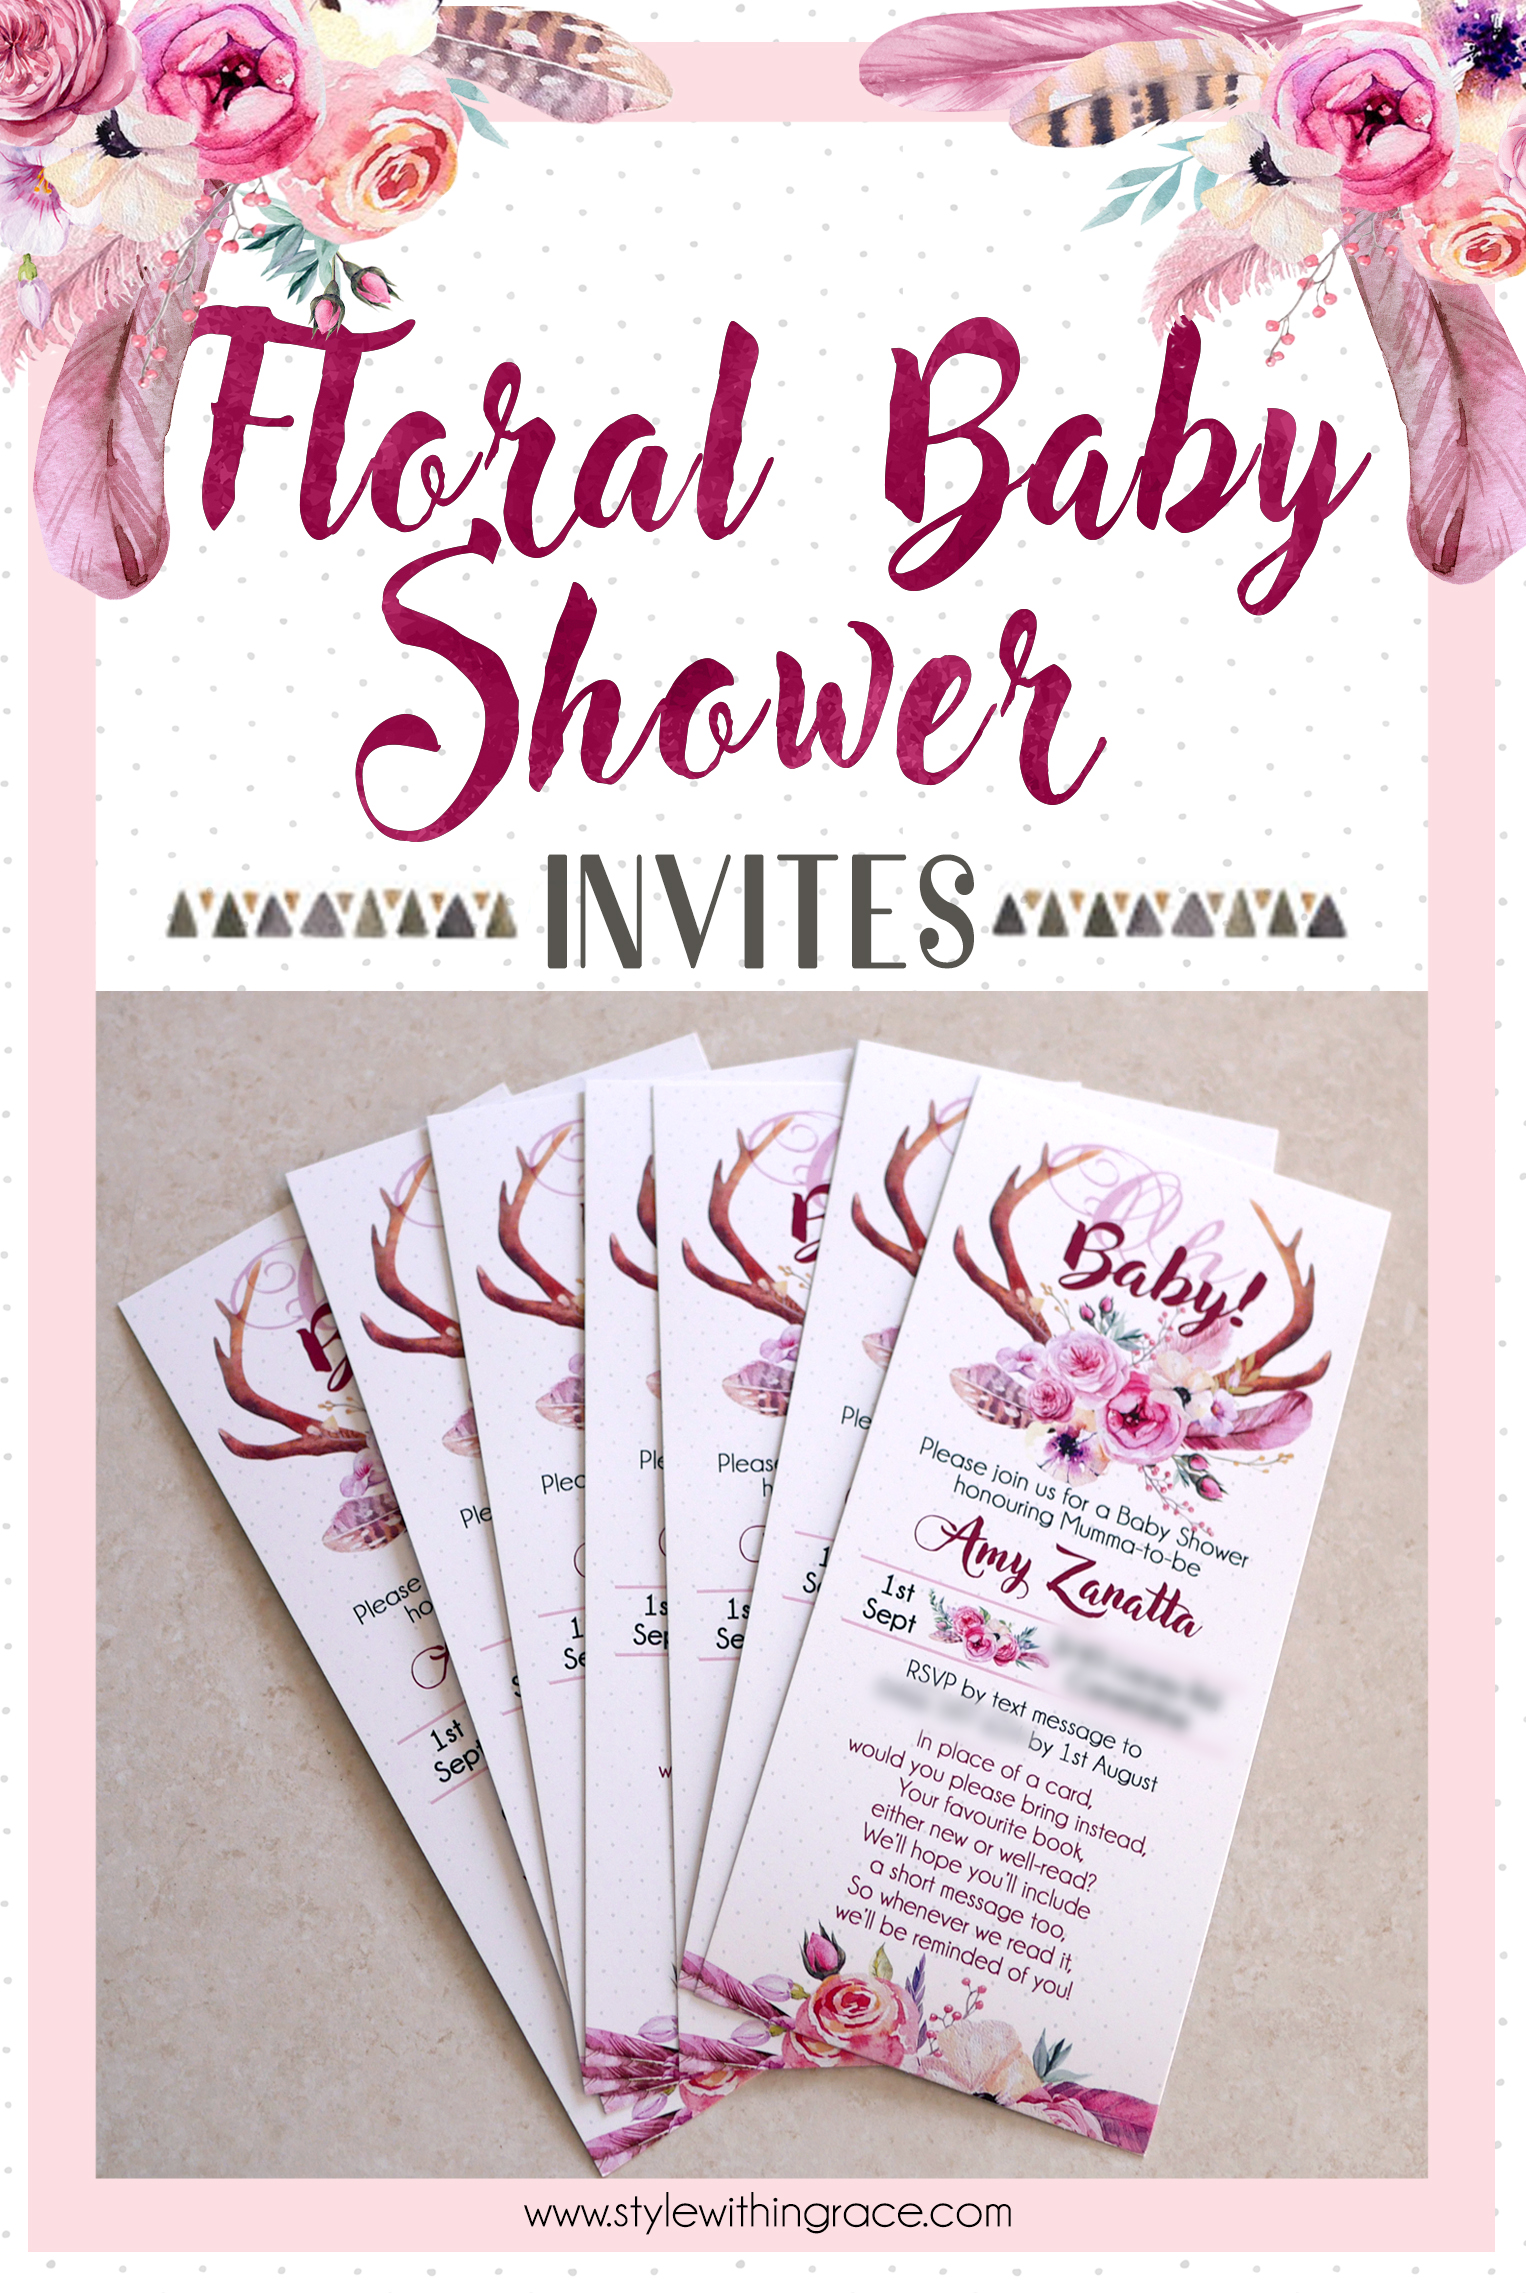 Floral Baby Shower Pinterest Graphic - Invites 01